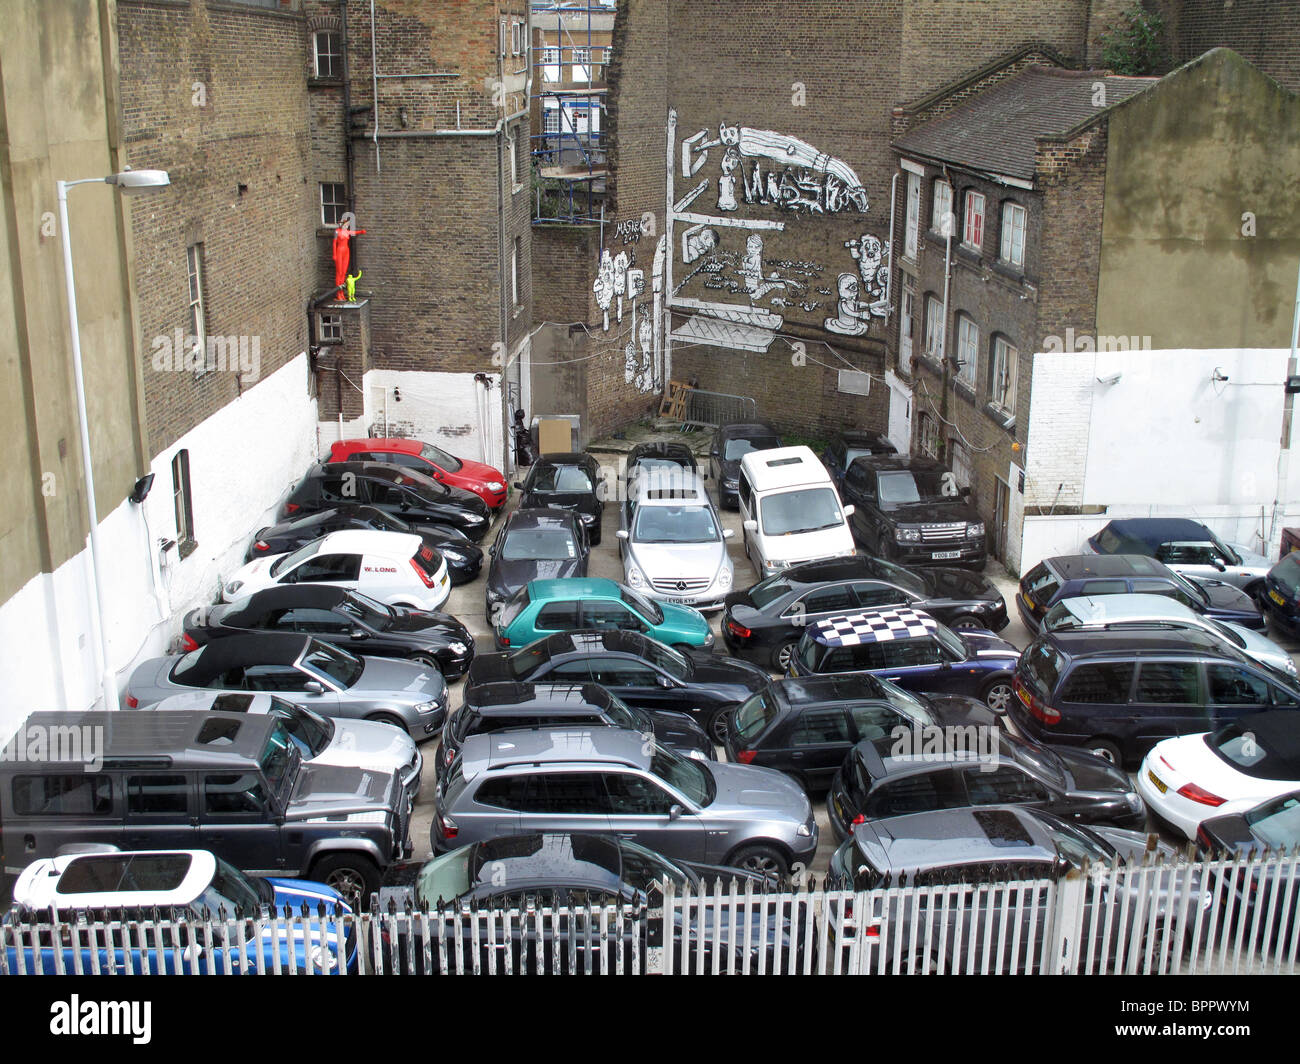 London car park. Maximising space by parking cars close together Stock Photo